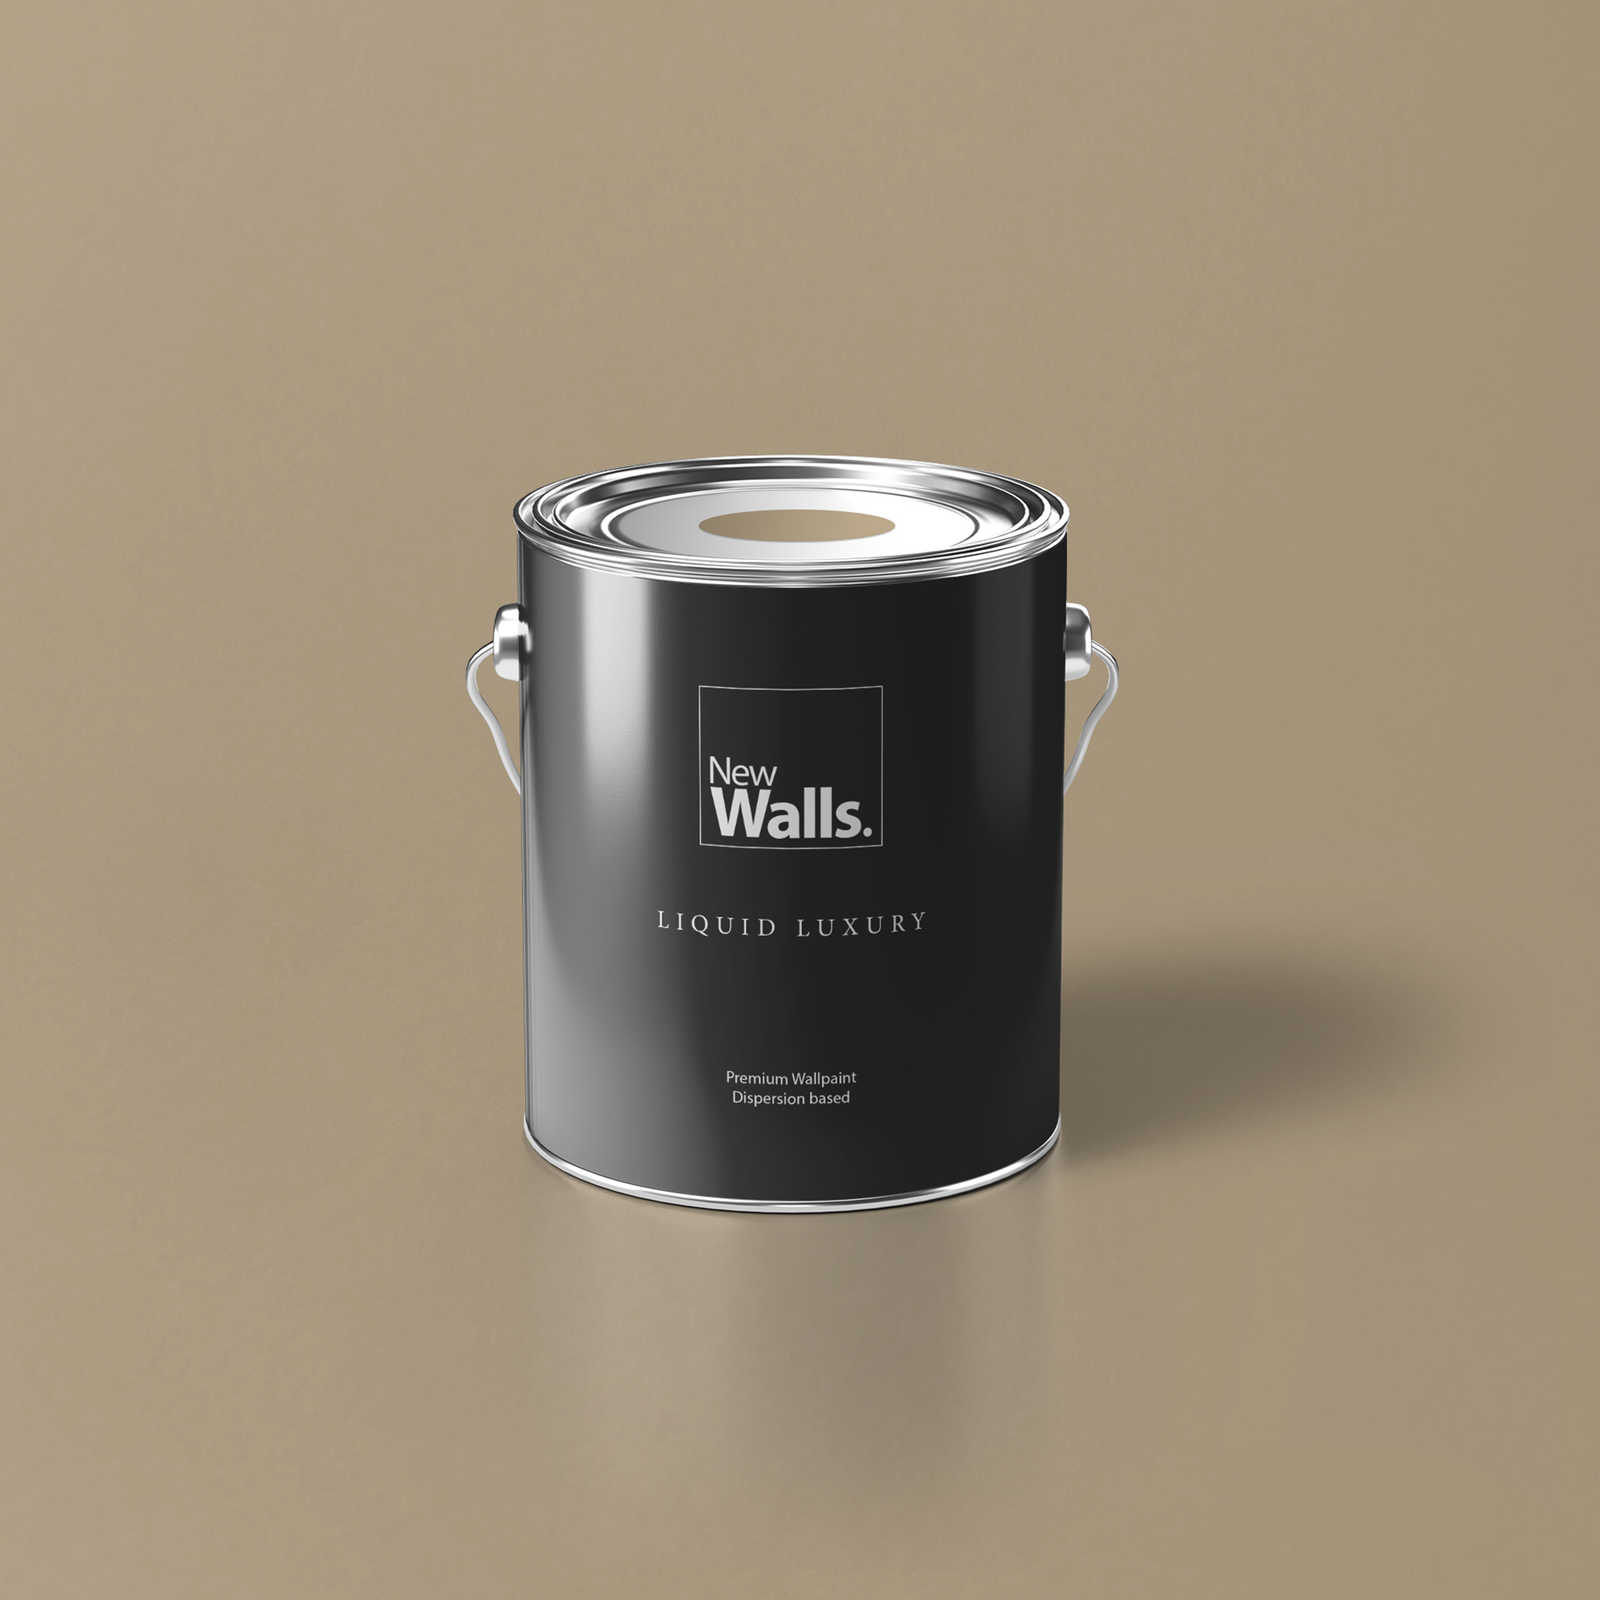 Premium Wall Paint down-to-earth cappuccino »Essential Earth« NW709 – 2.5 litre
